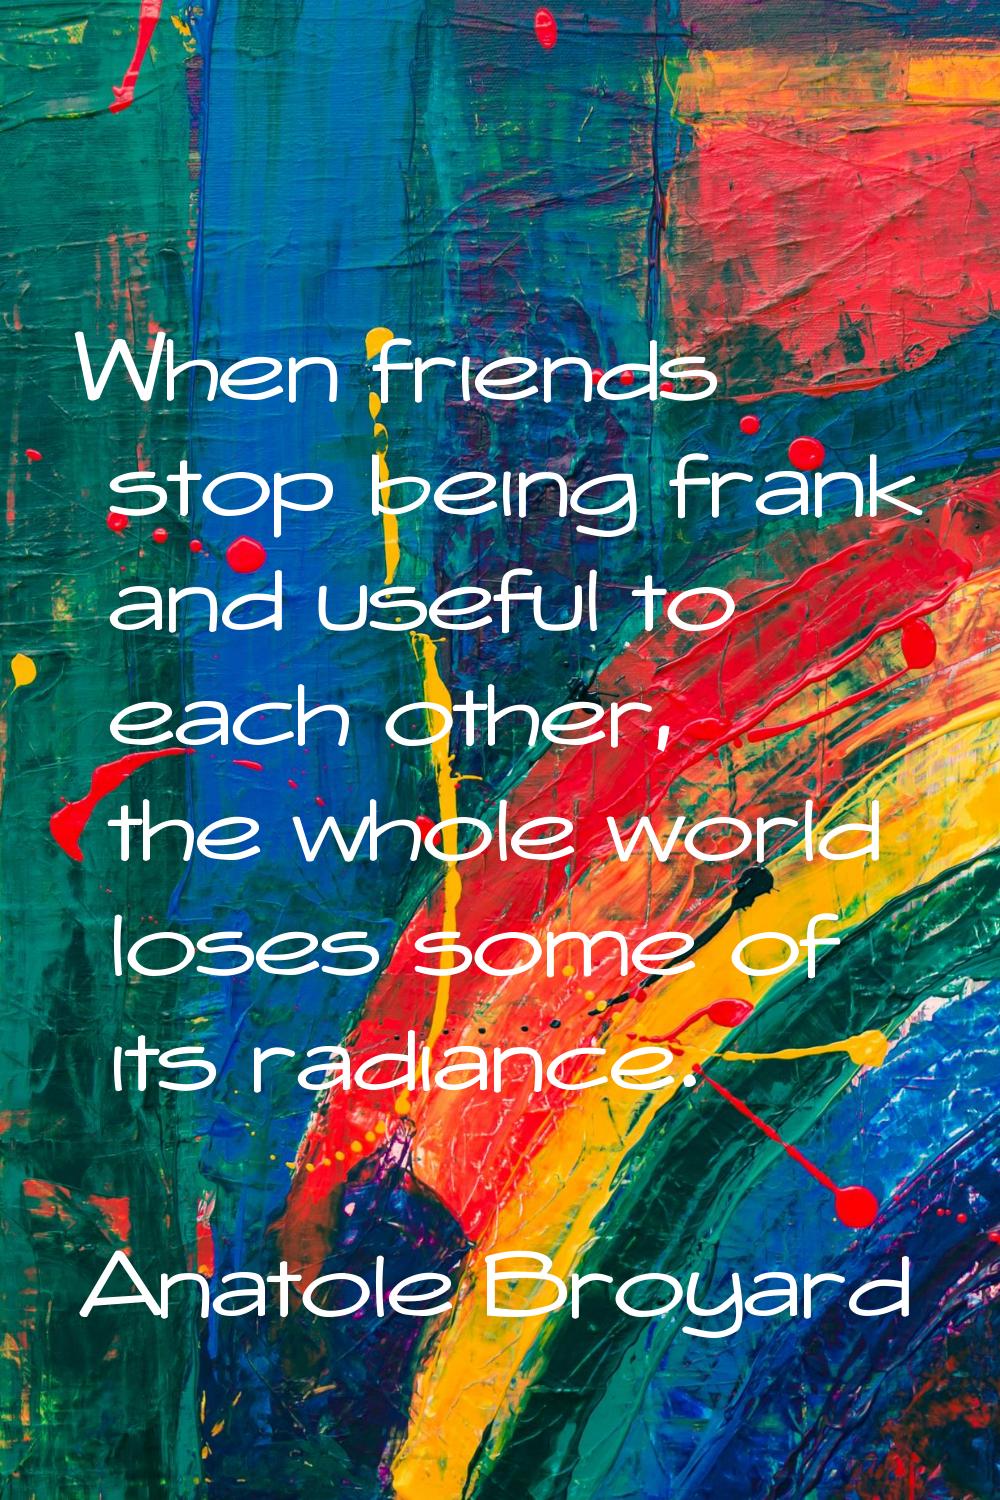 When friends stop being frank and useful to each other, the whole world loses some of its radiance.